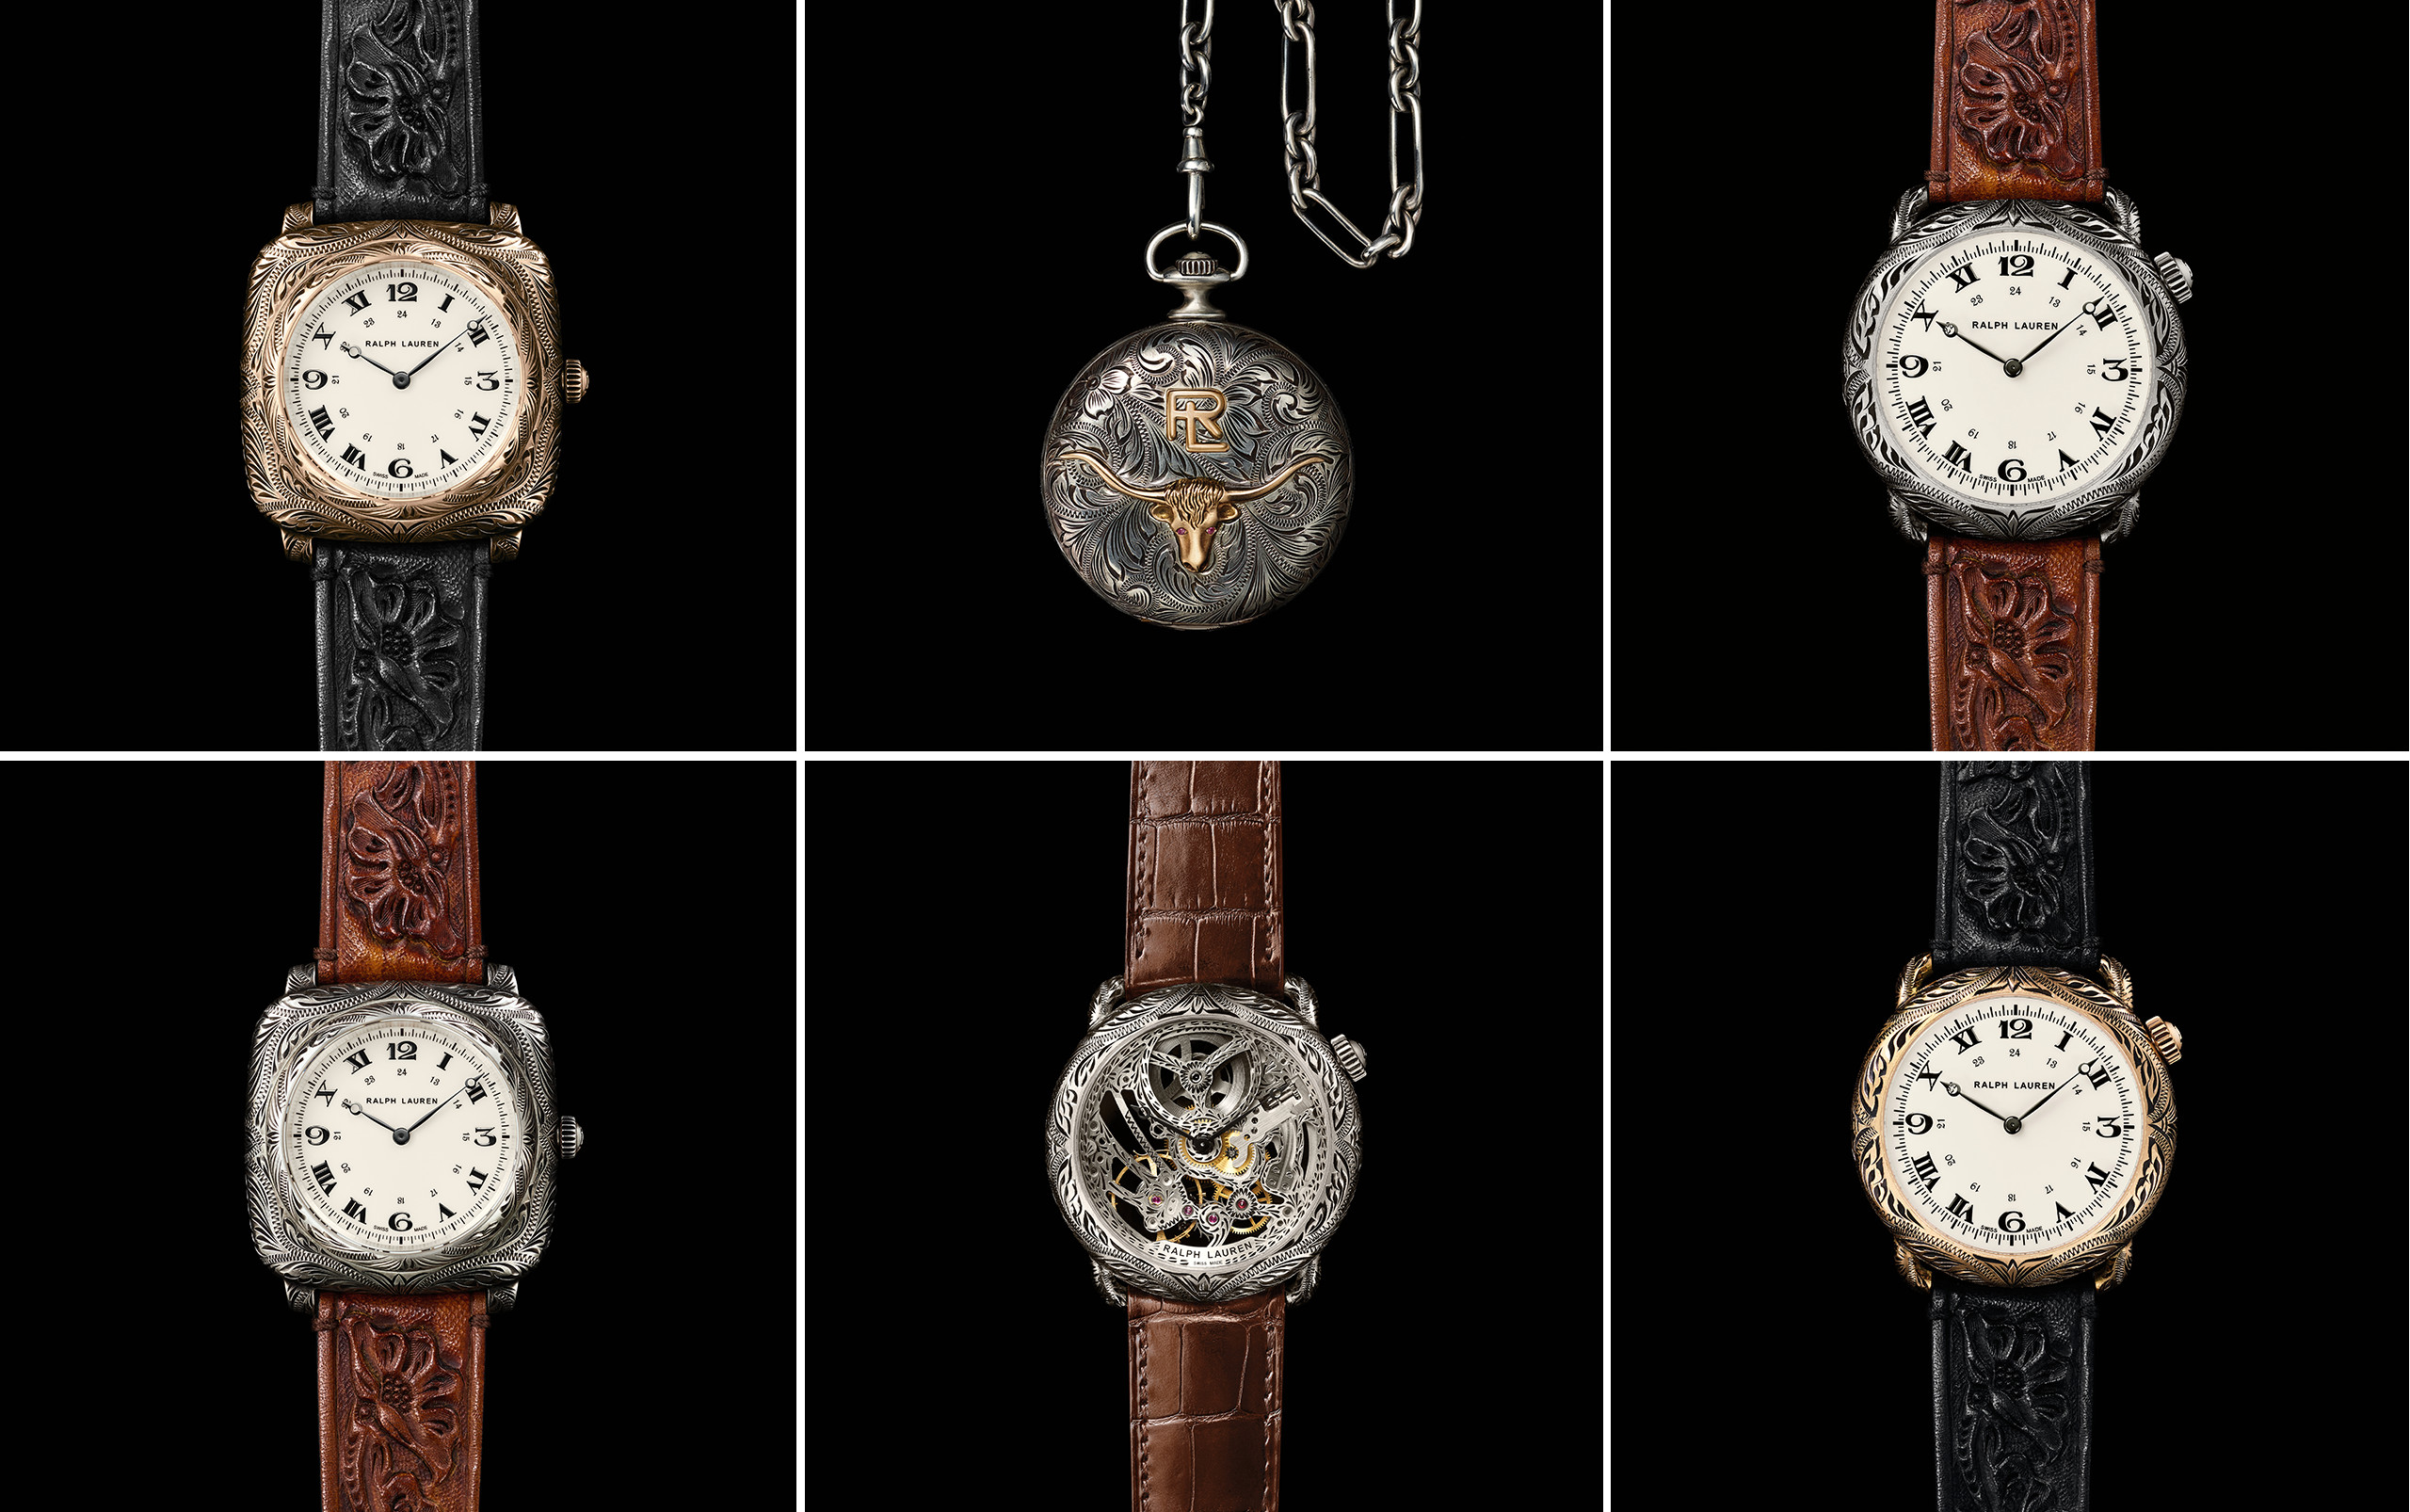 The six models in the American Western watch collection, clockwise, from top left: Rose Gold Cushion, Pocket, Sterling Silver Round, Rose Gold Round, Round Skeleton, Sterling Silver Cushion